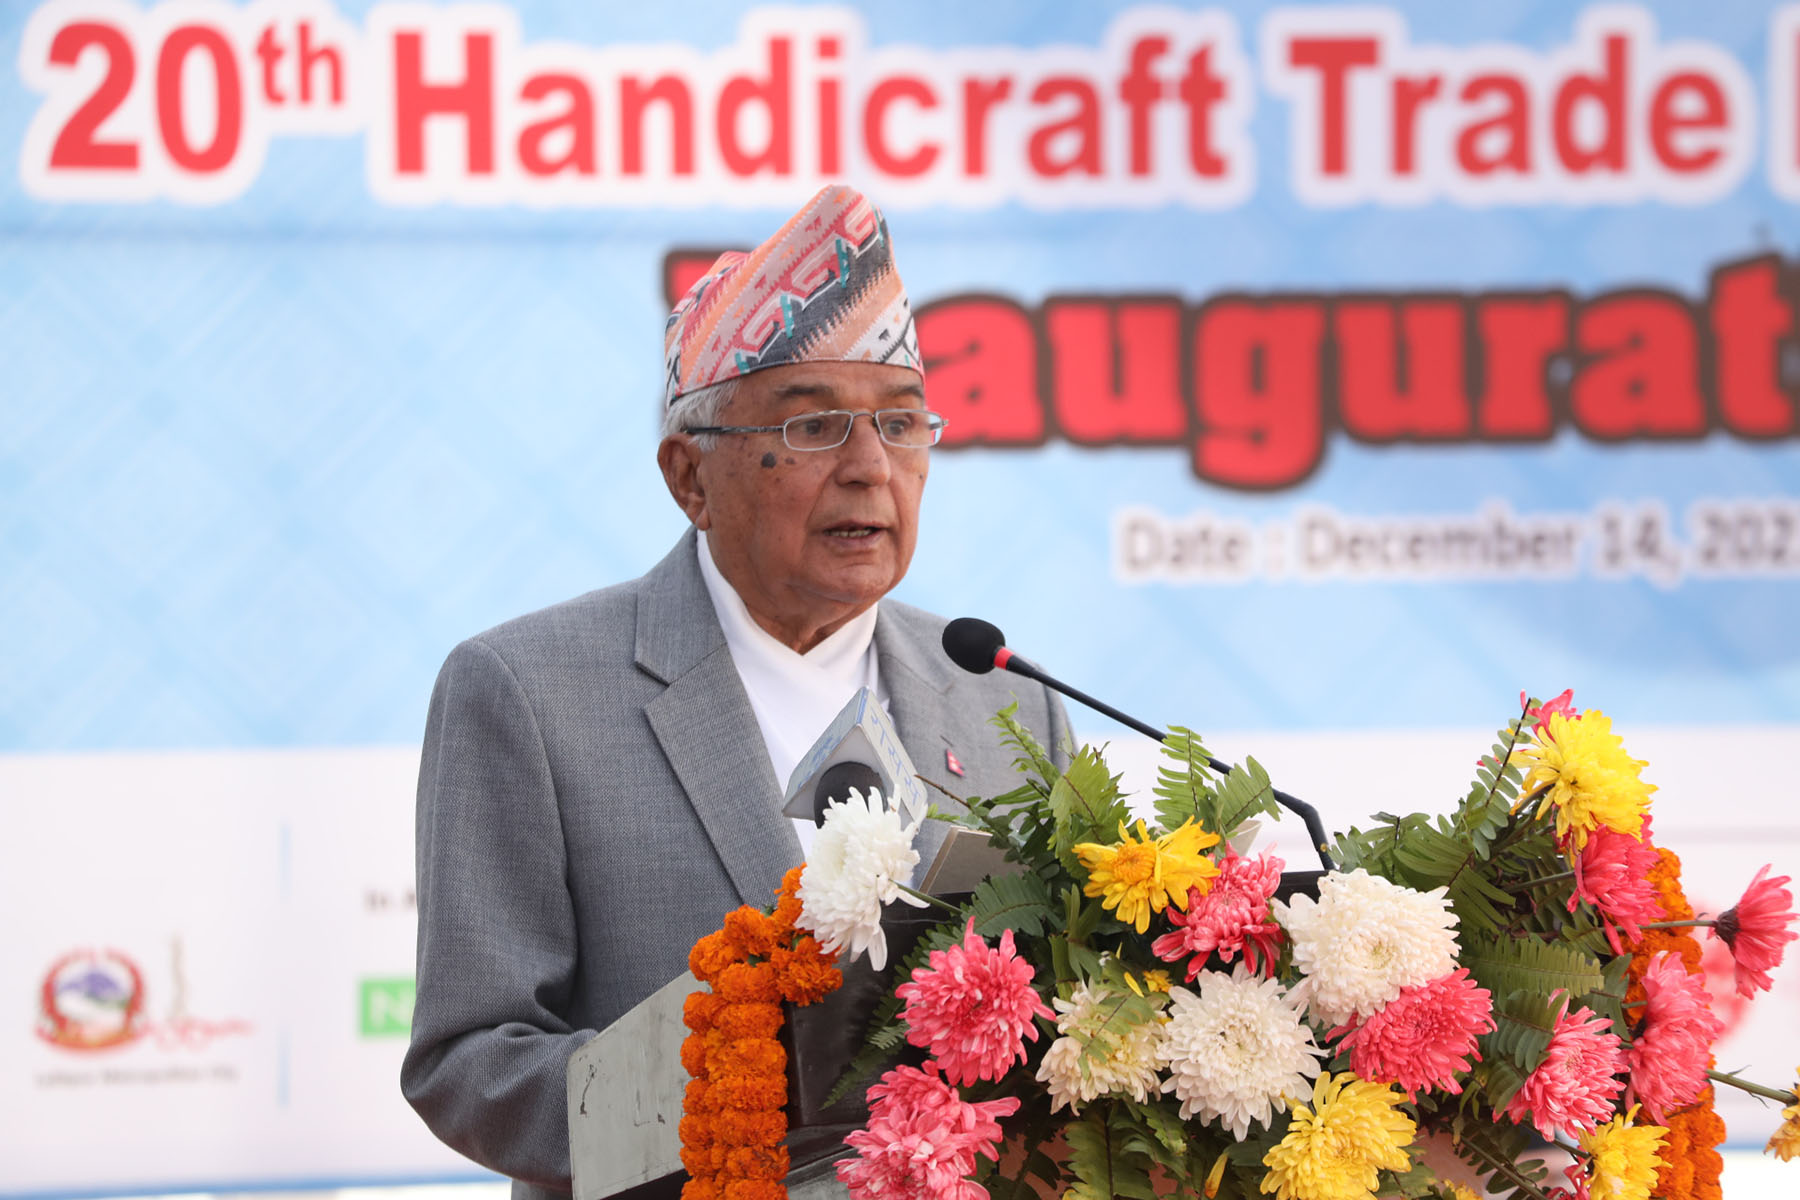 President Paudel stresses on handicraft trade and industry-friendly policy